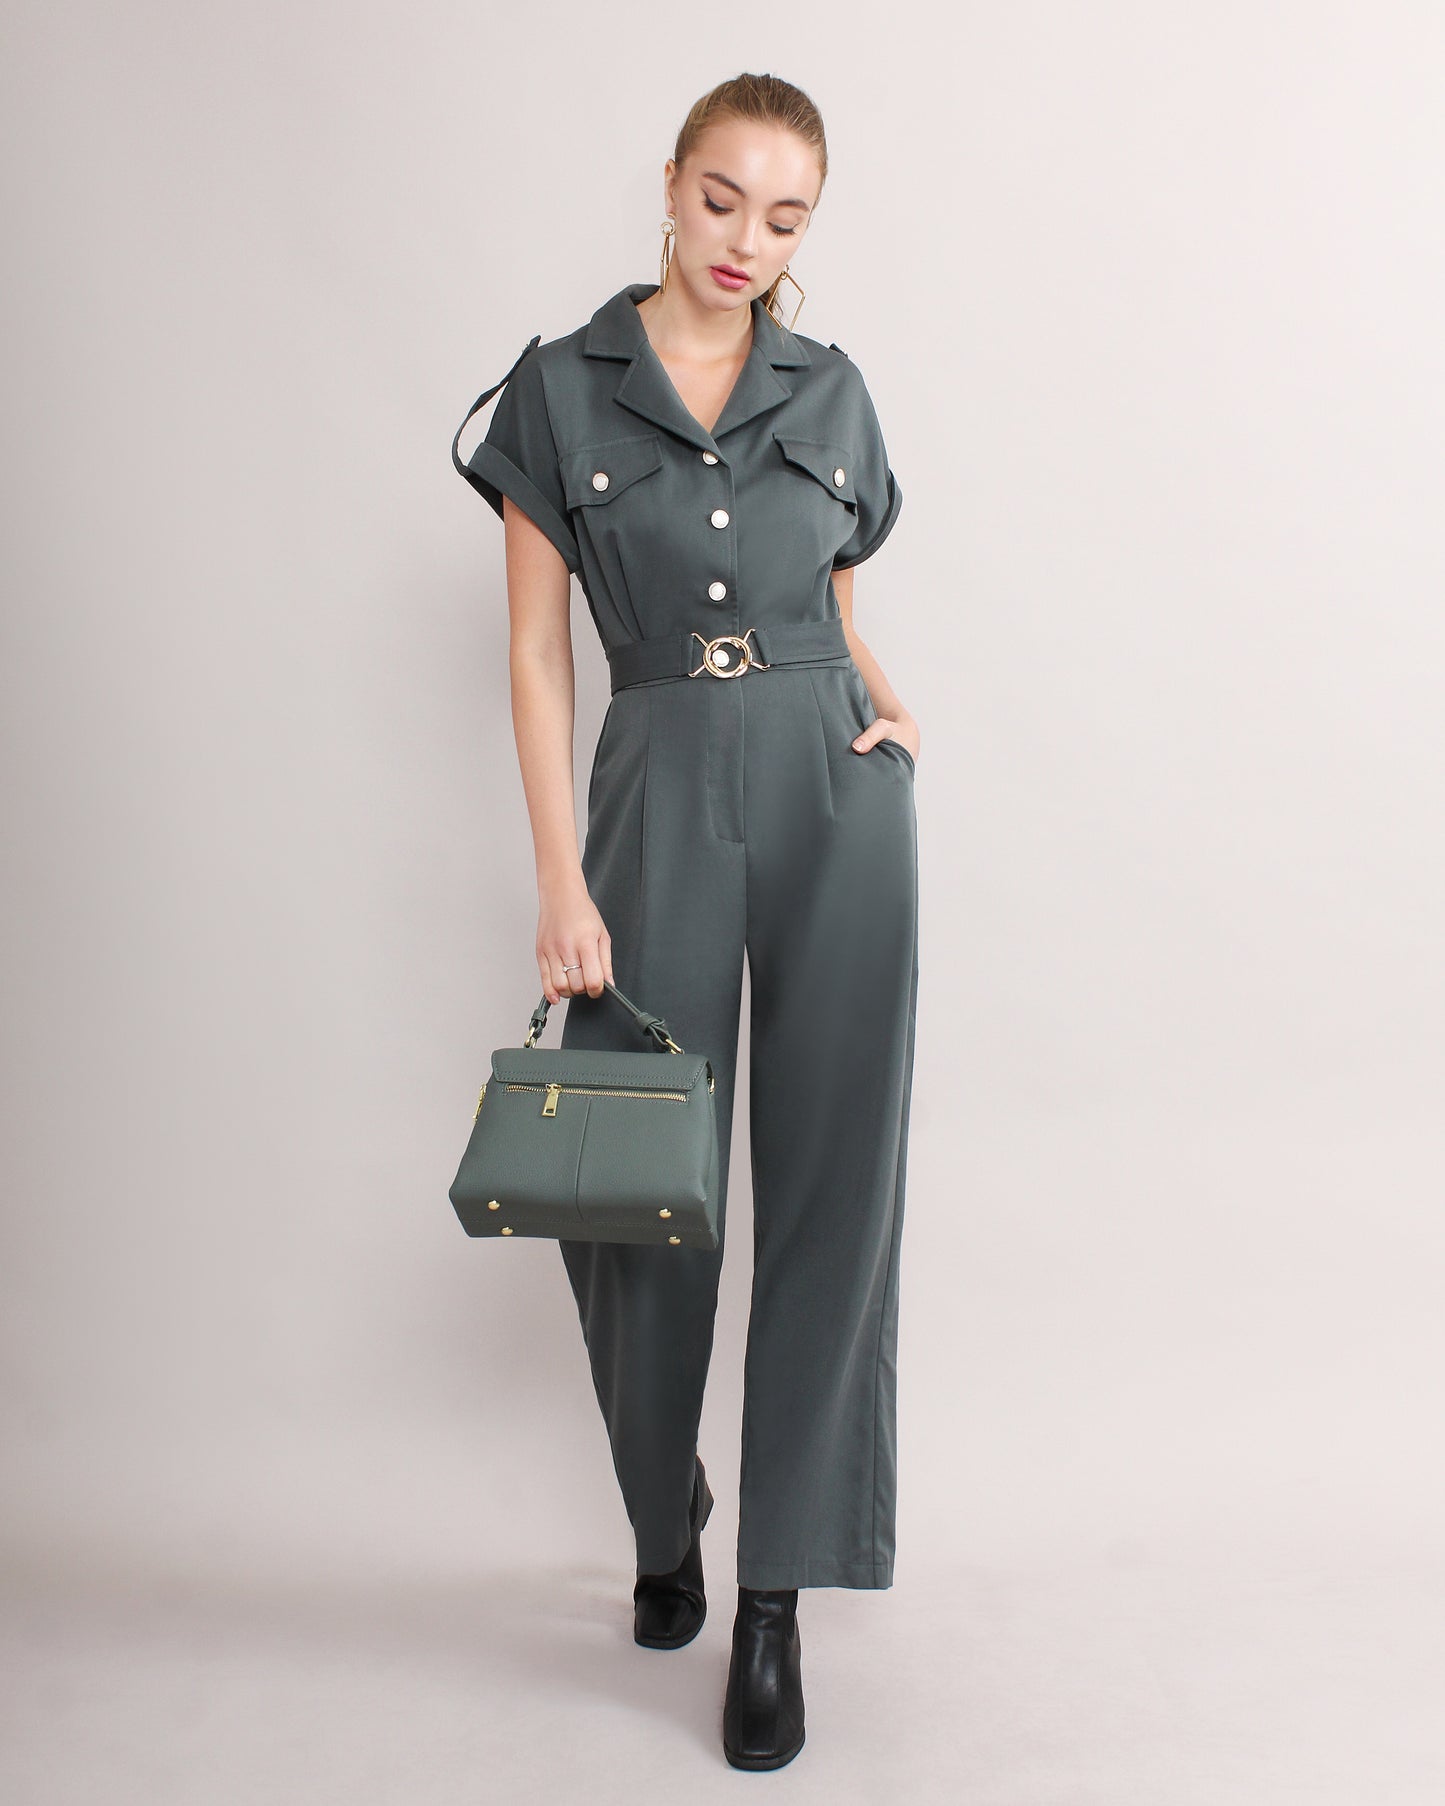 Notched Collar Cap Sleeve Sashes Jumpsuit